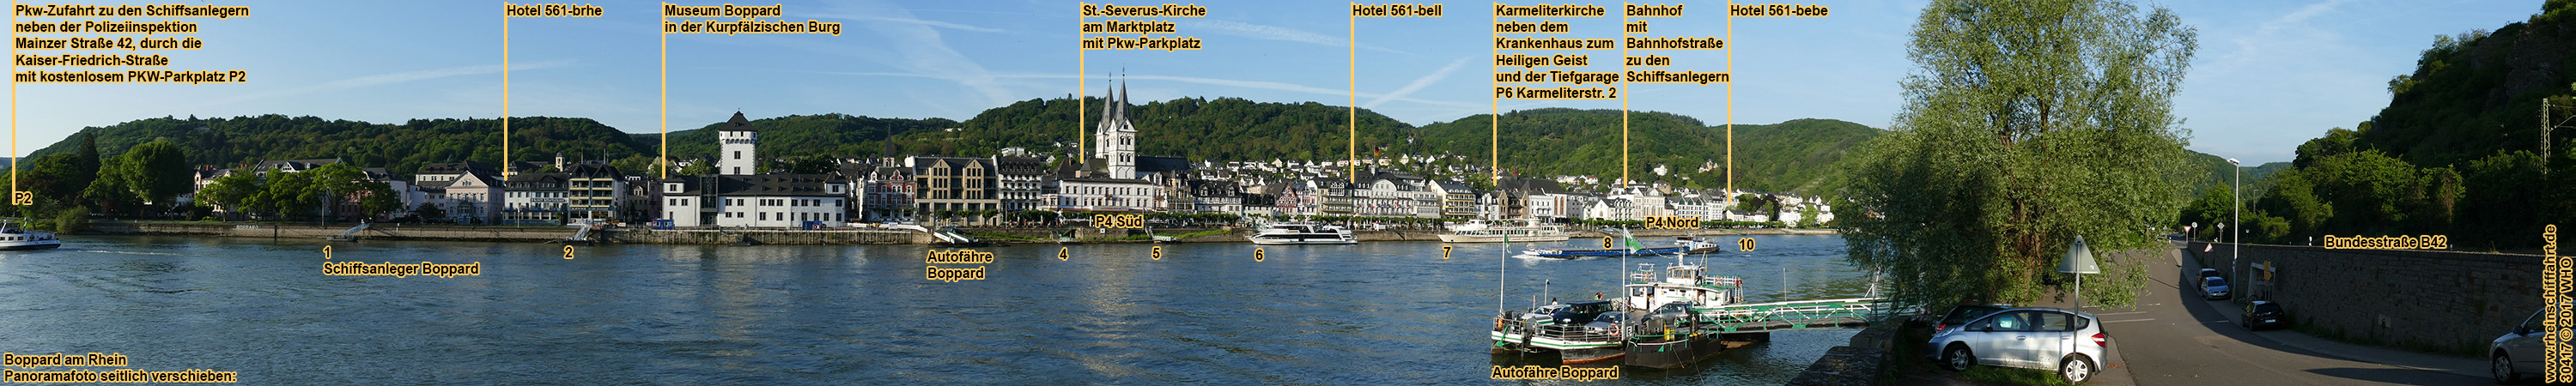 <holiday in Boppard on the romantic Rhine River in Germany